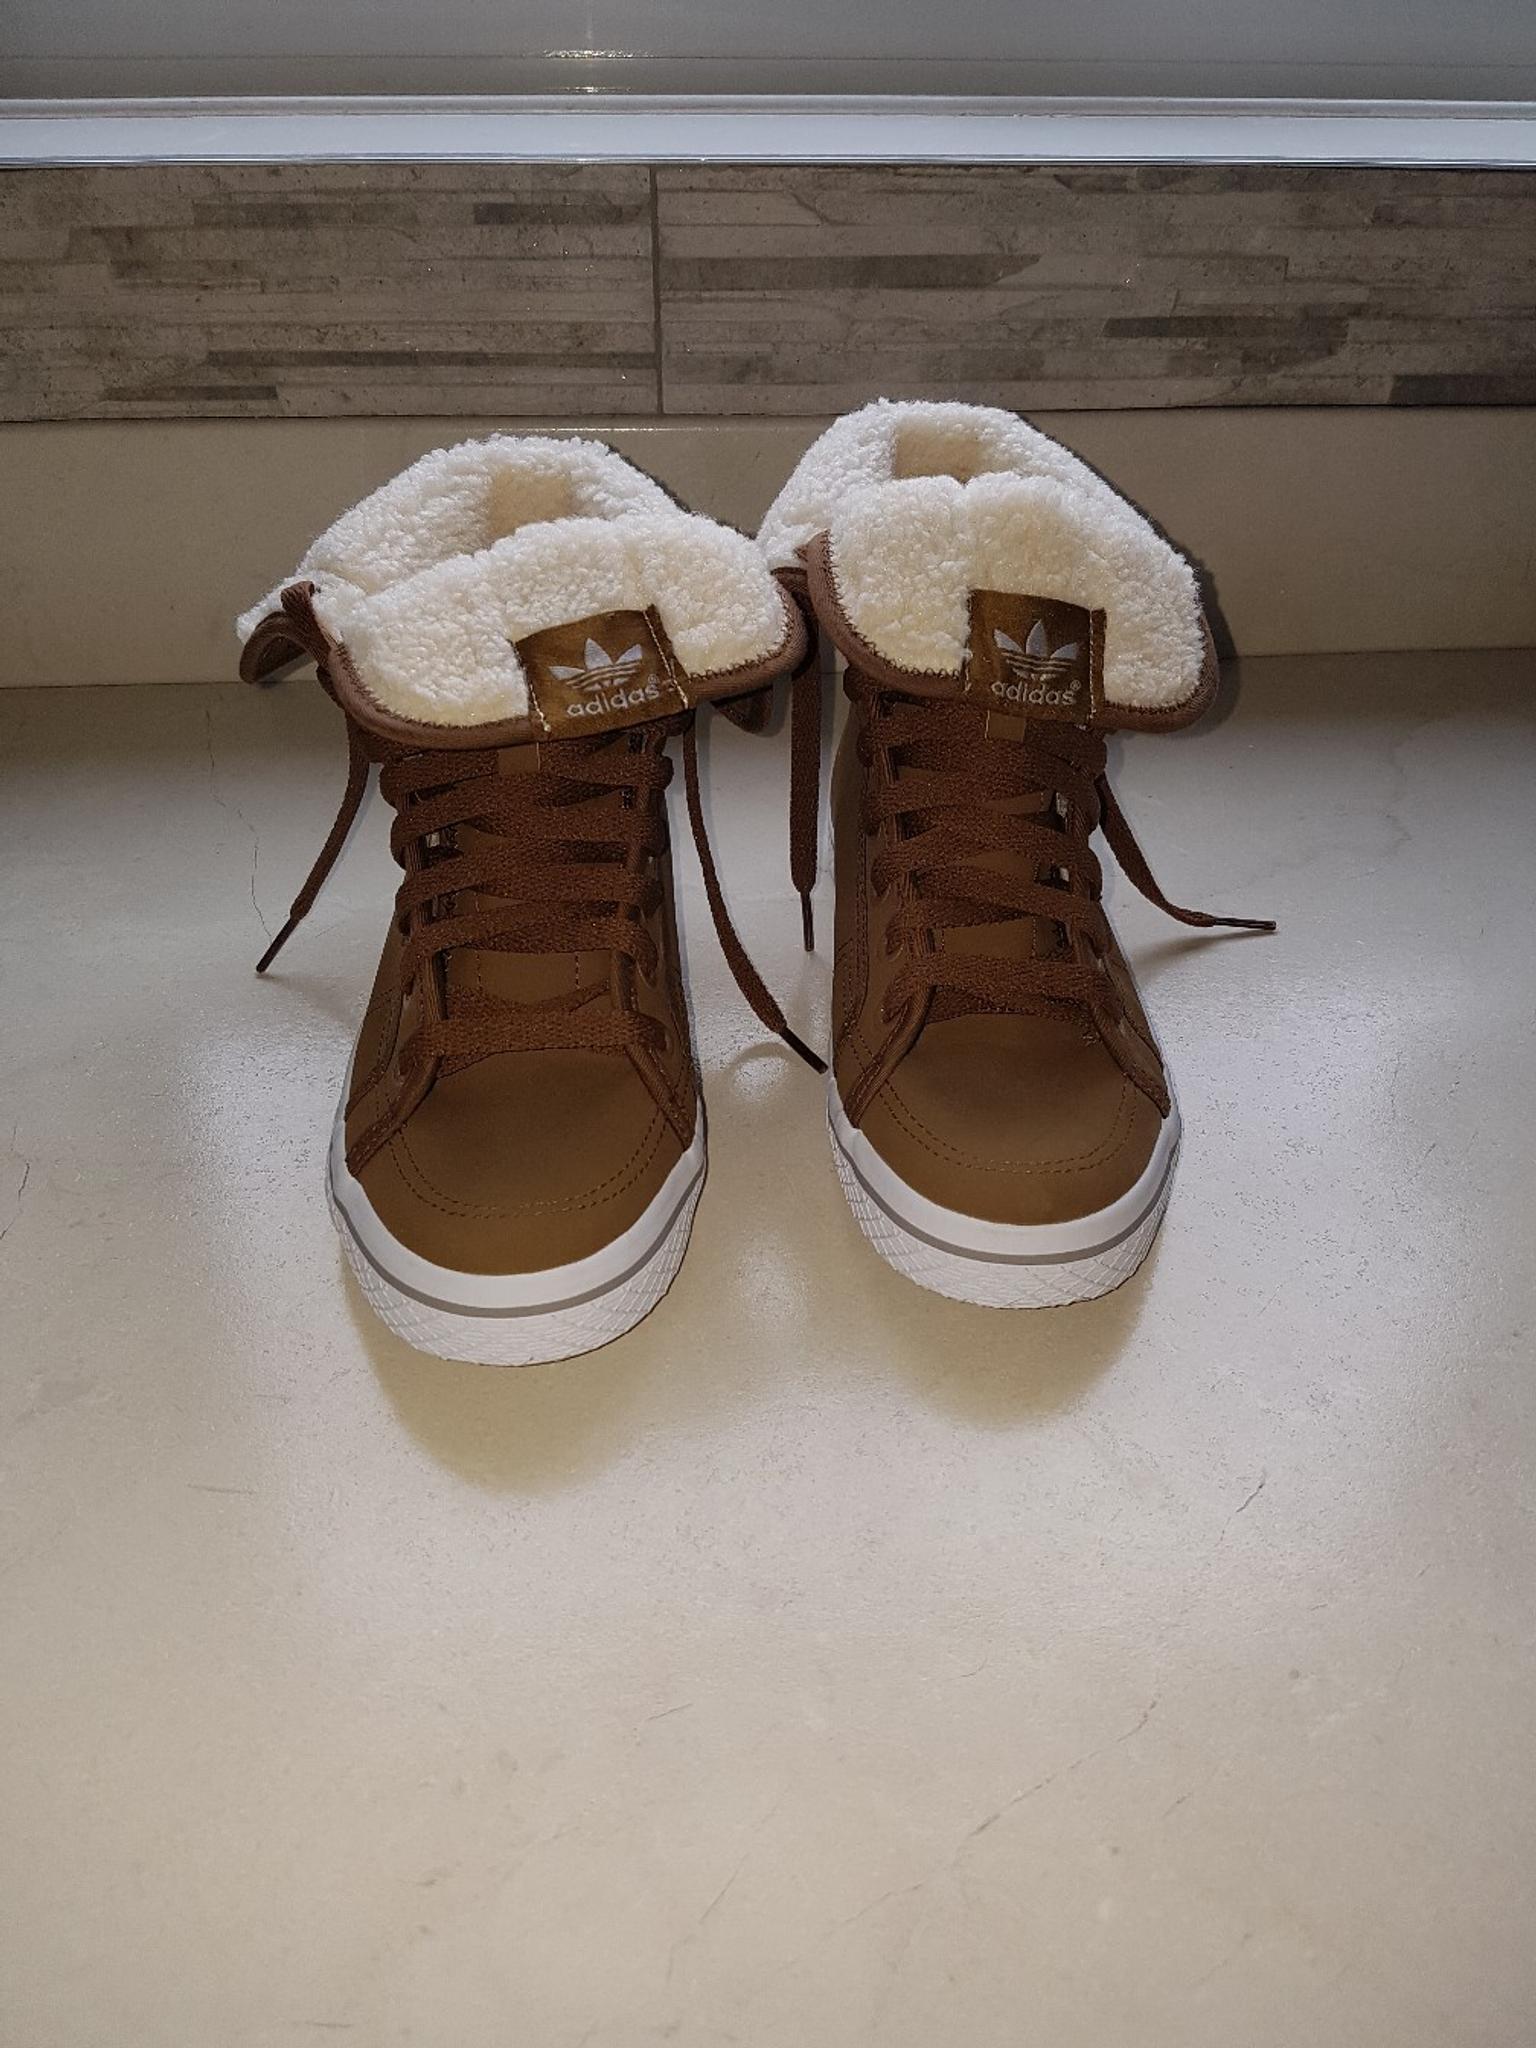 adidas fur ankle boots